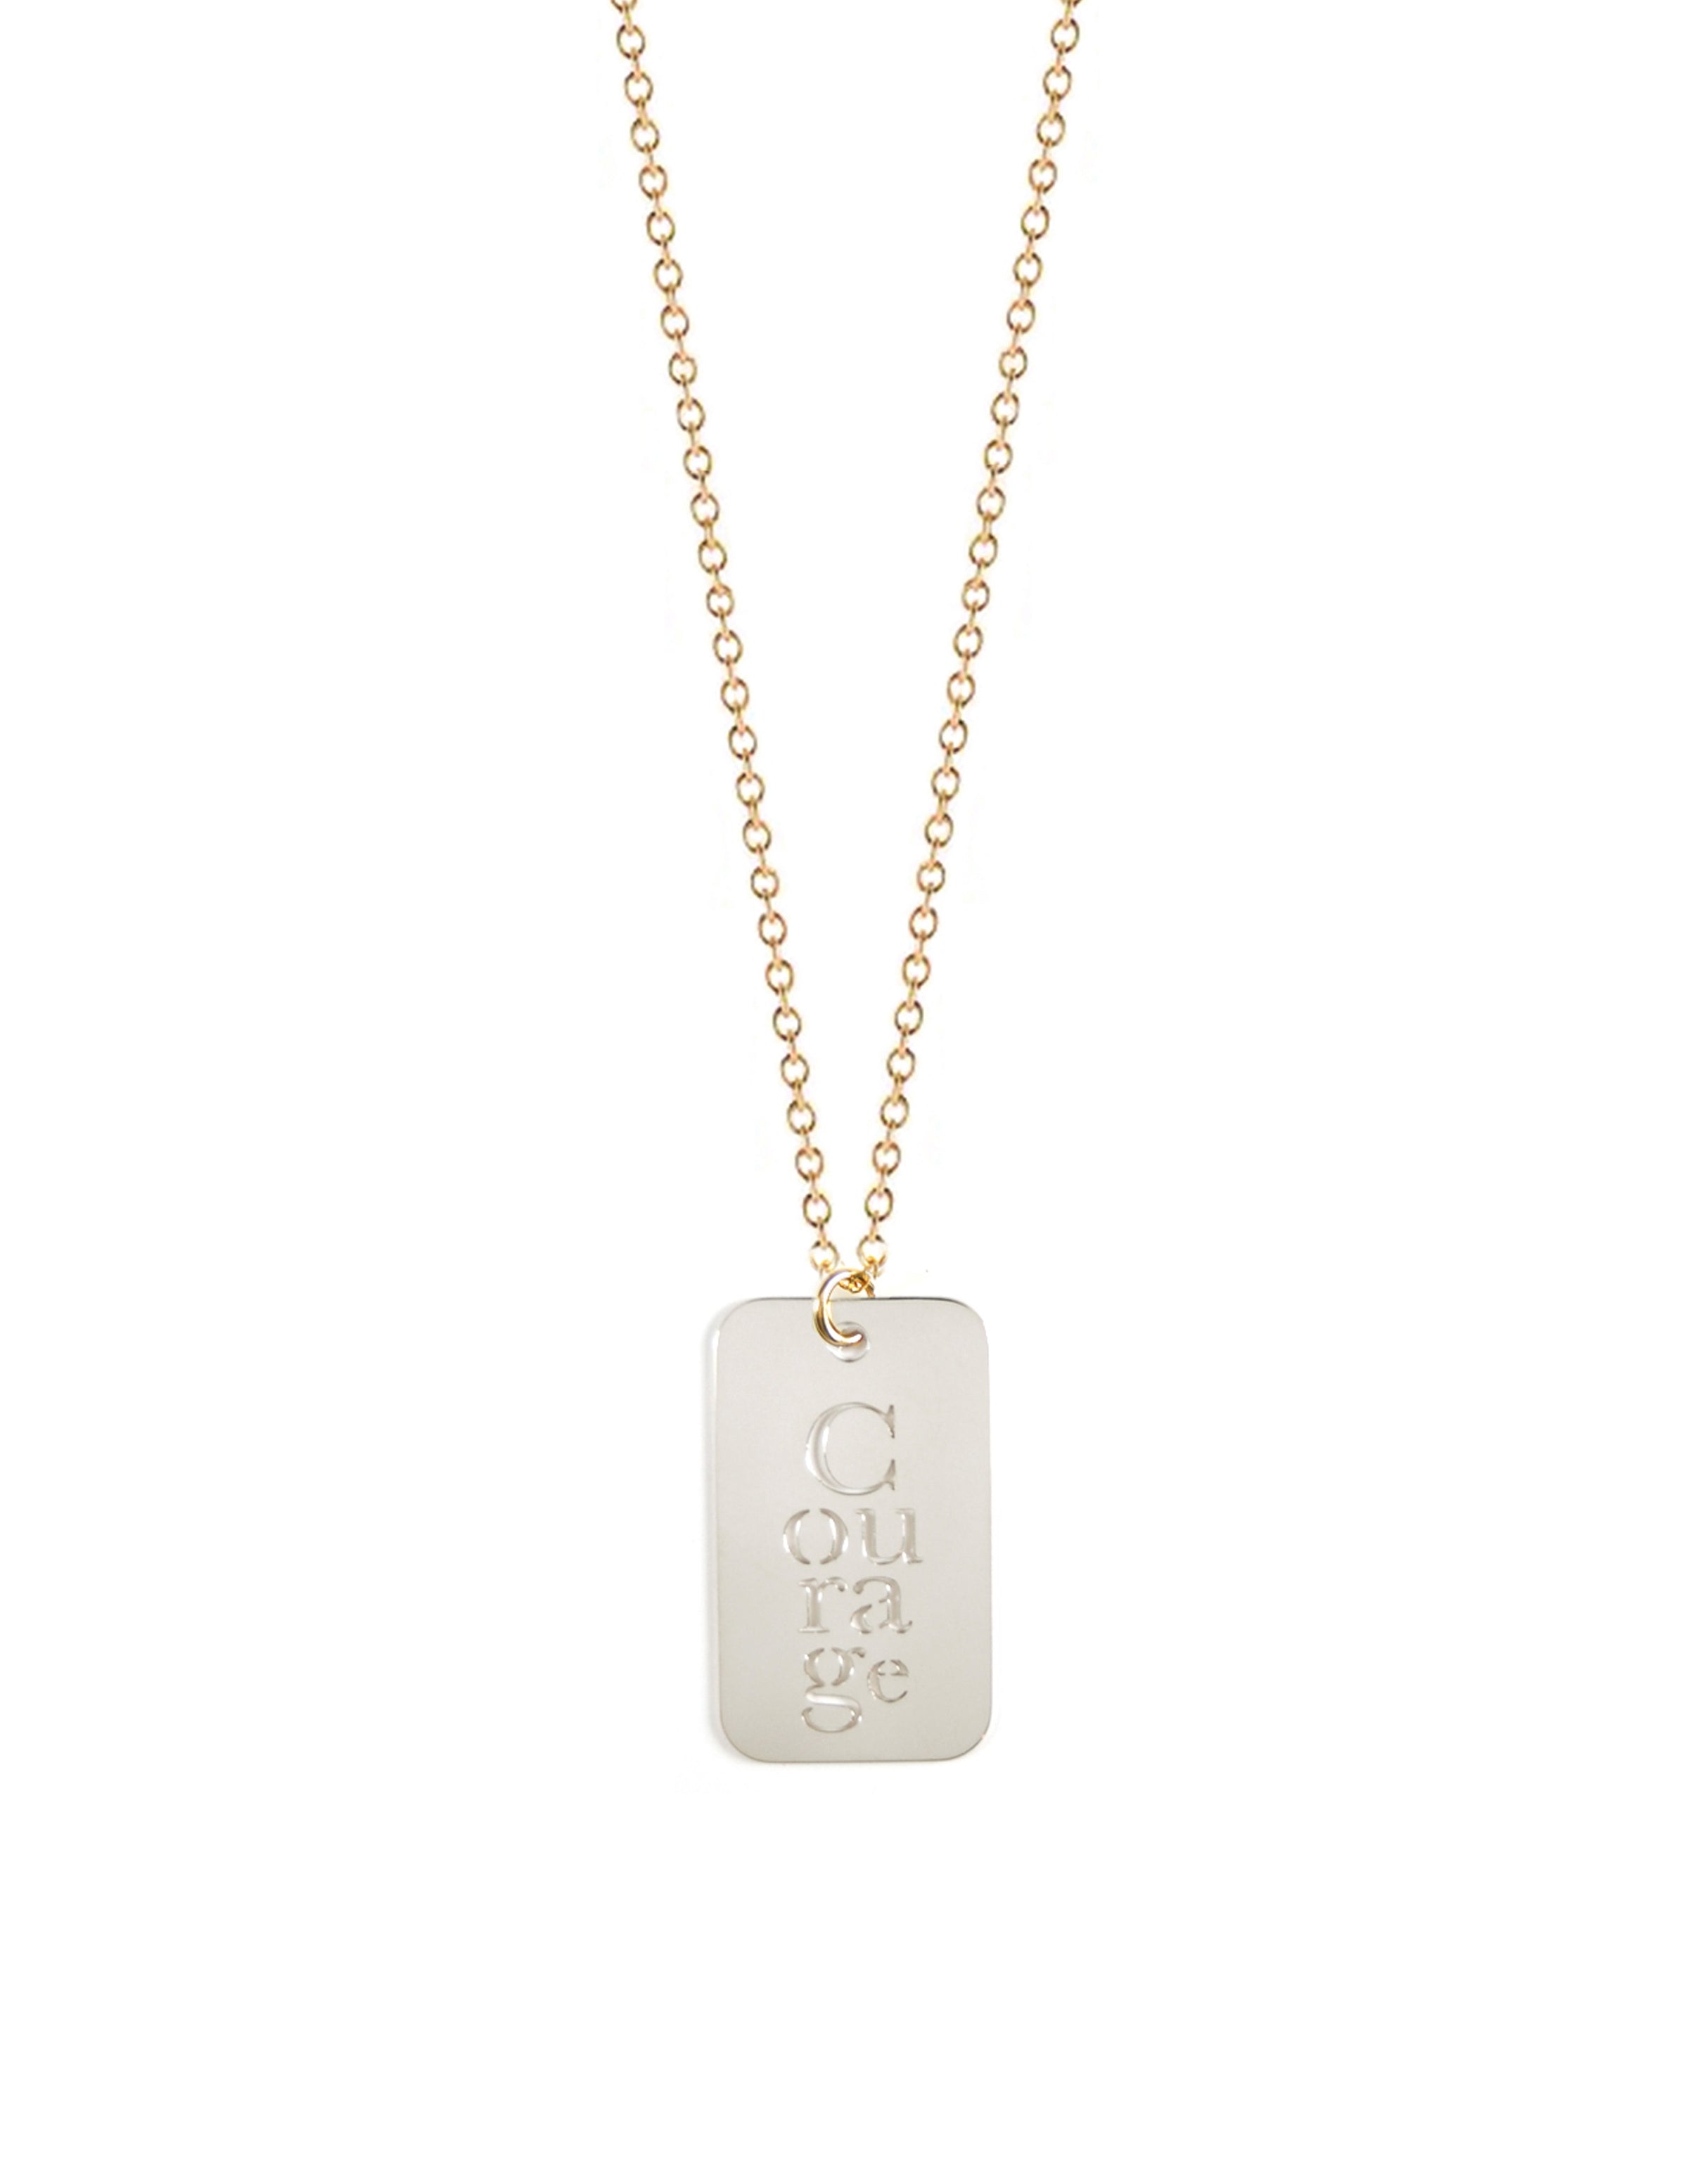 Courage Tag Necklace